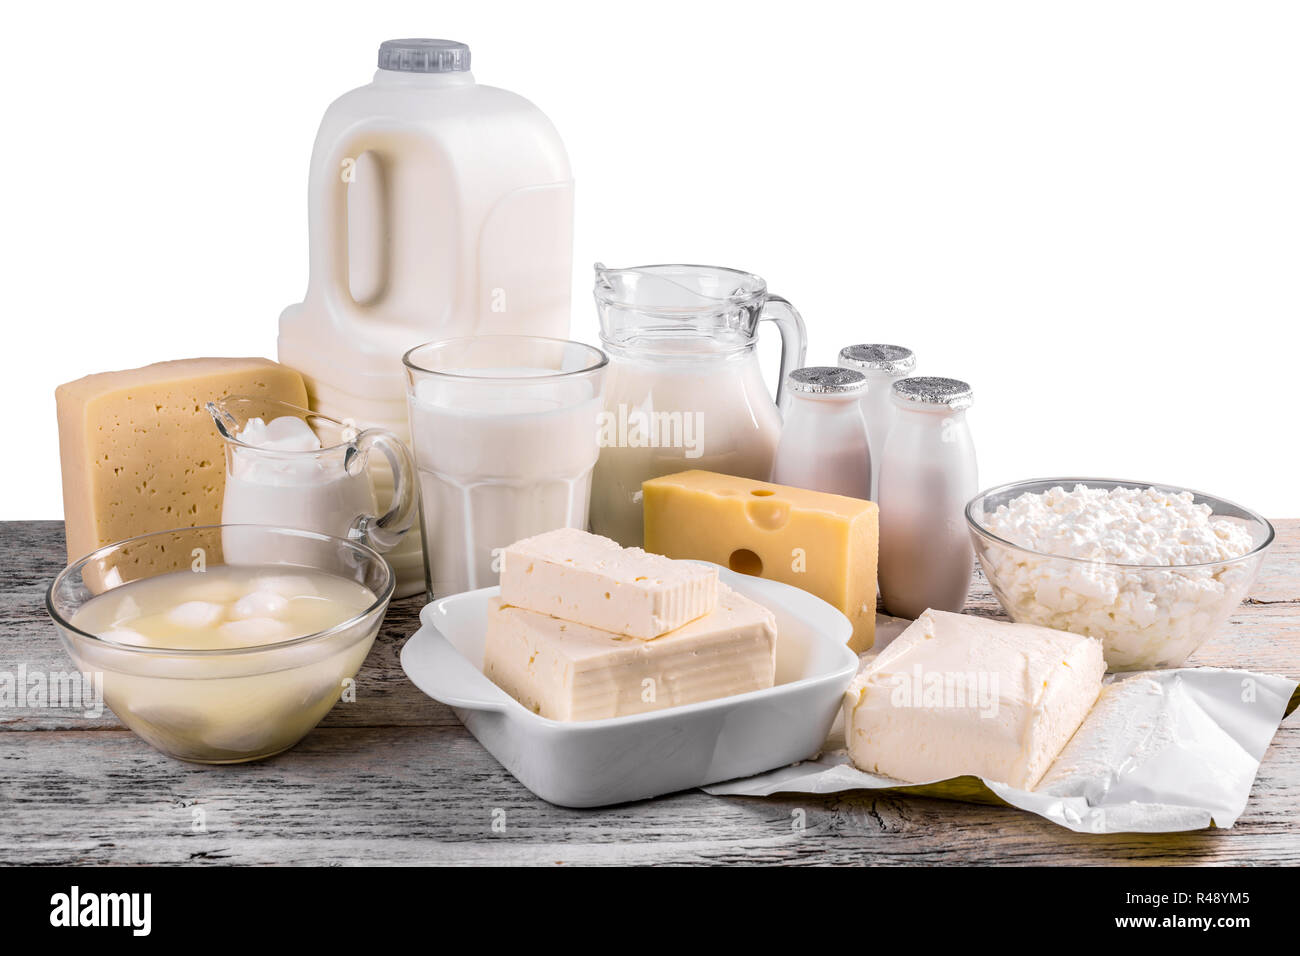 Tasty dairy products Stock Photo